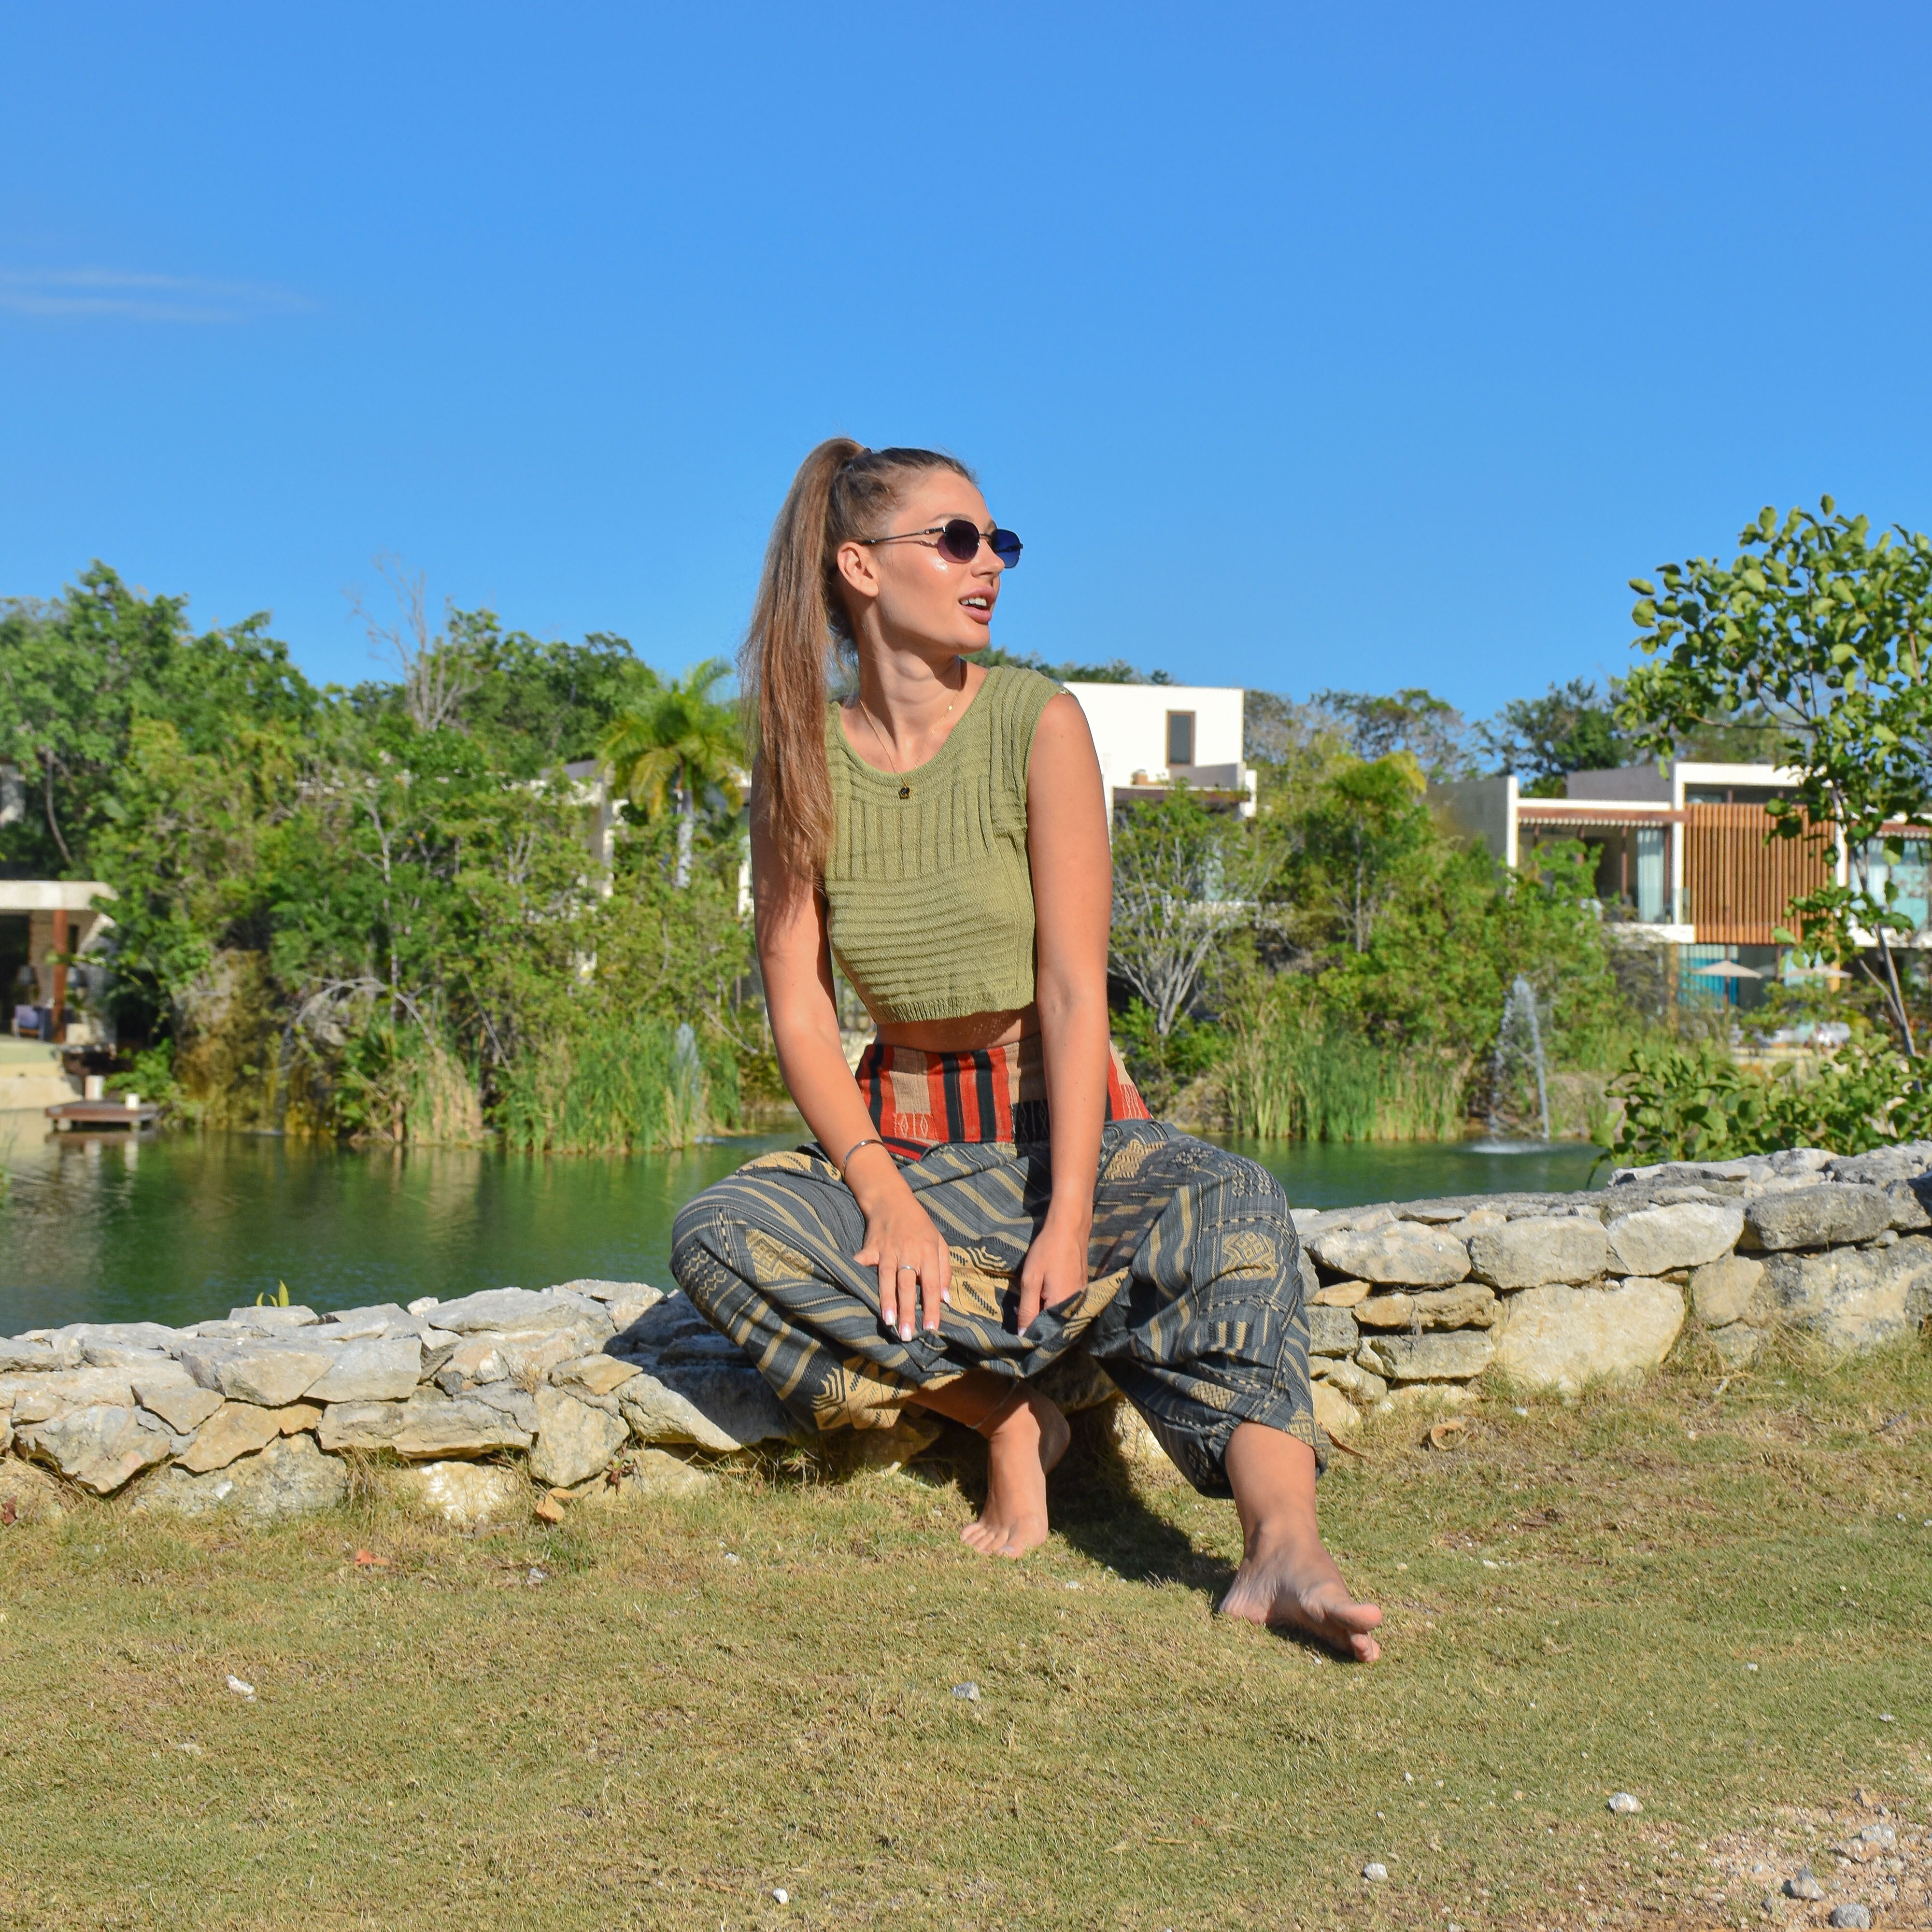 ANTALYA PANTS Elepanta Unisex Casual Pants - Buy Today Elephant Pants Jewelry And Bohemian Clothes Handmade In Thailand Help To Save The Elephants FairTrade And Vegan